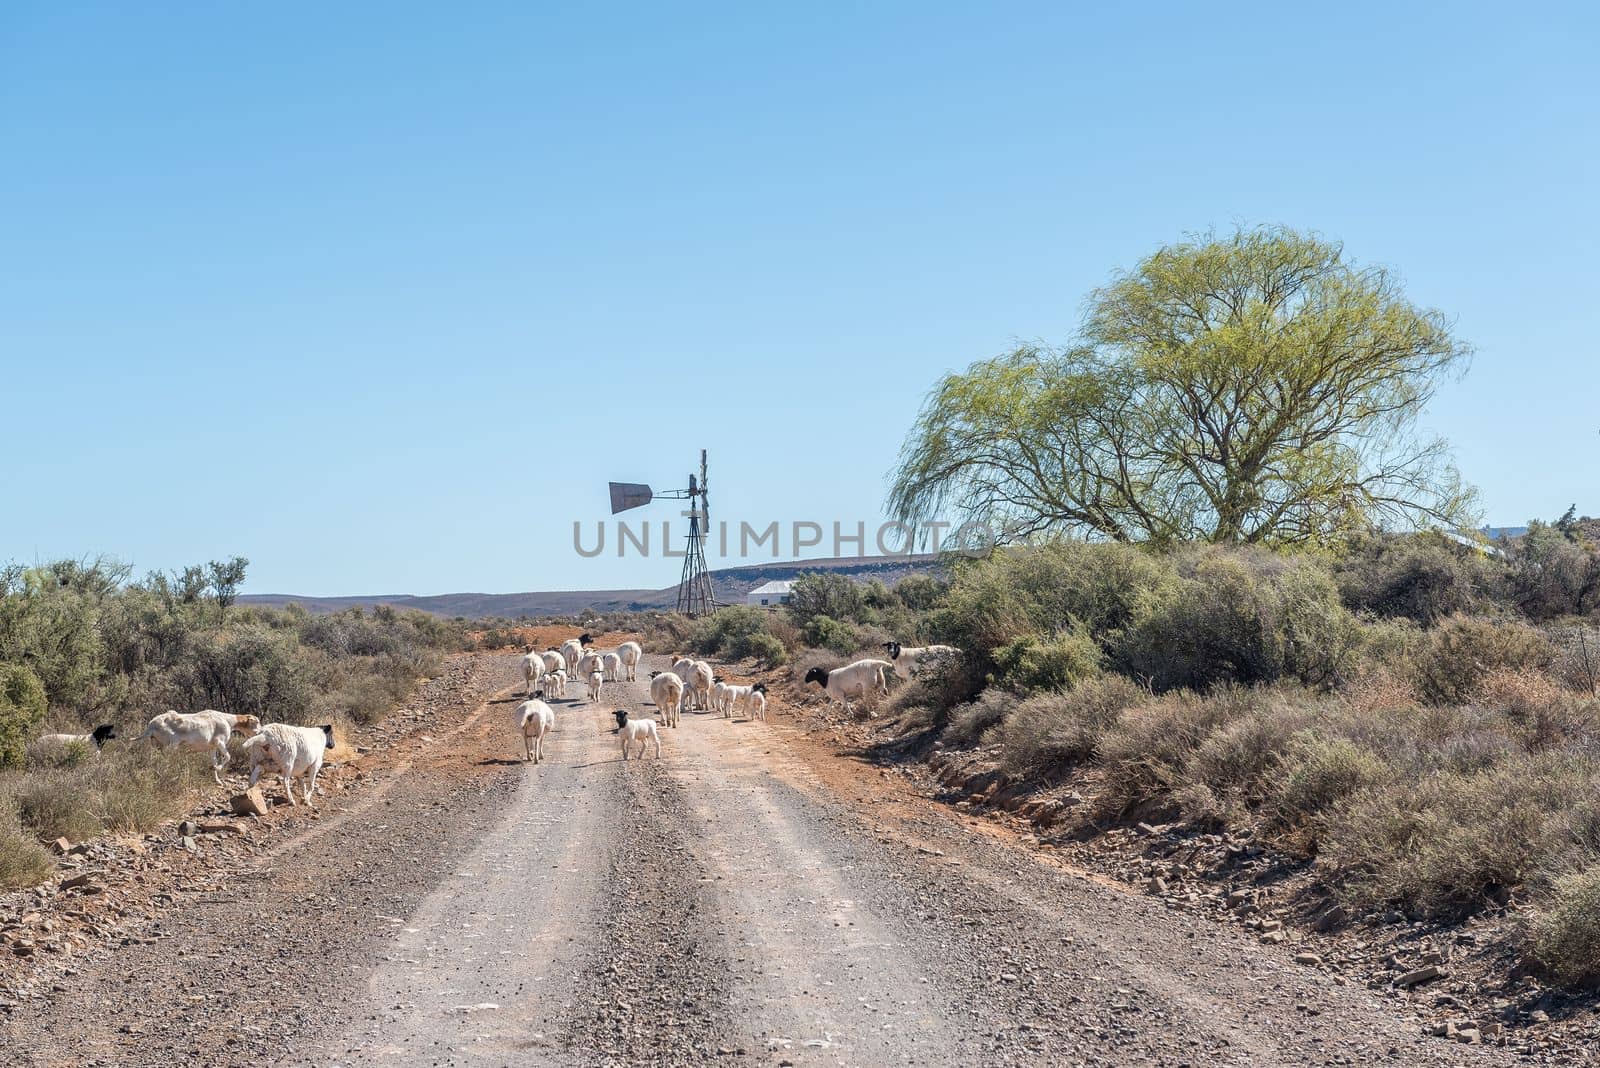 Sheep blocking the historic Postal Route between Fraserburg and Sutherland in the Northern Cape Karoo. A windmill is visible